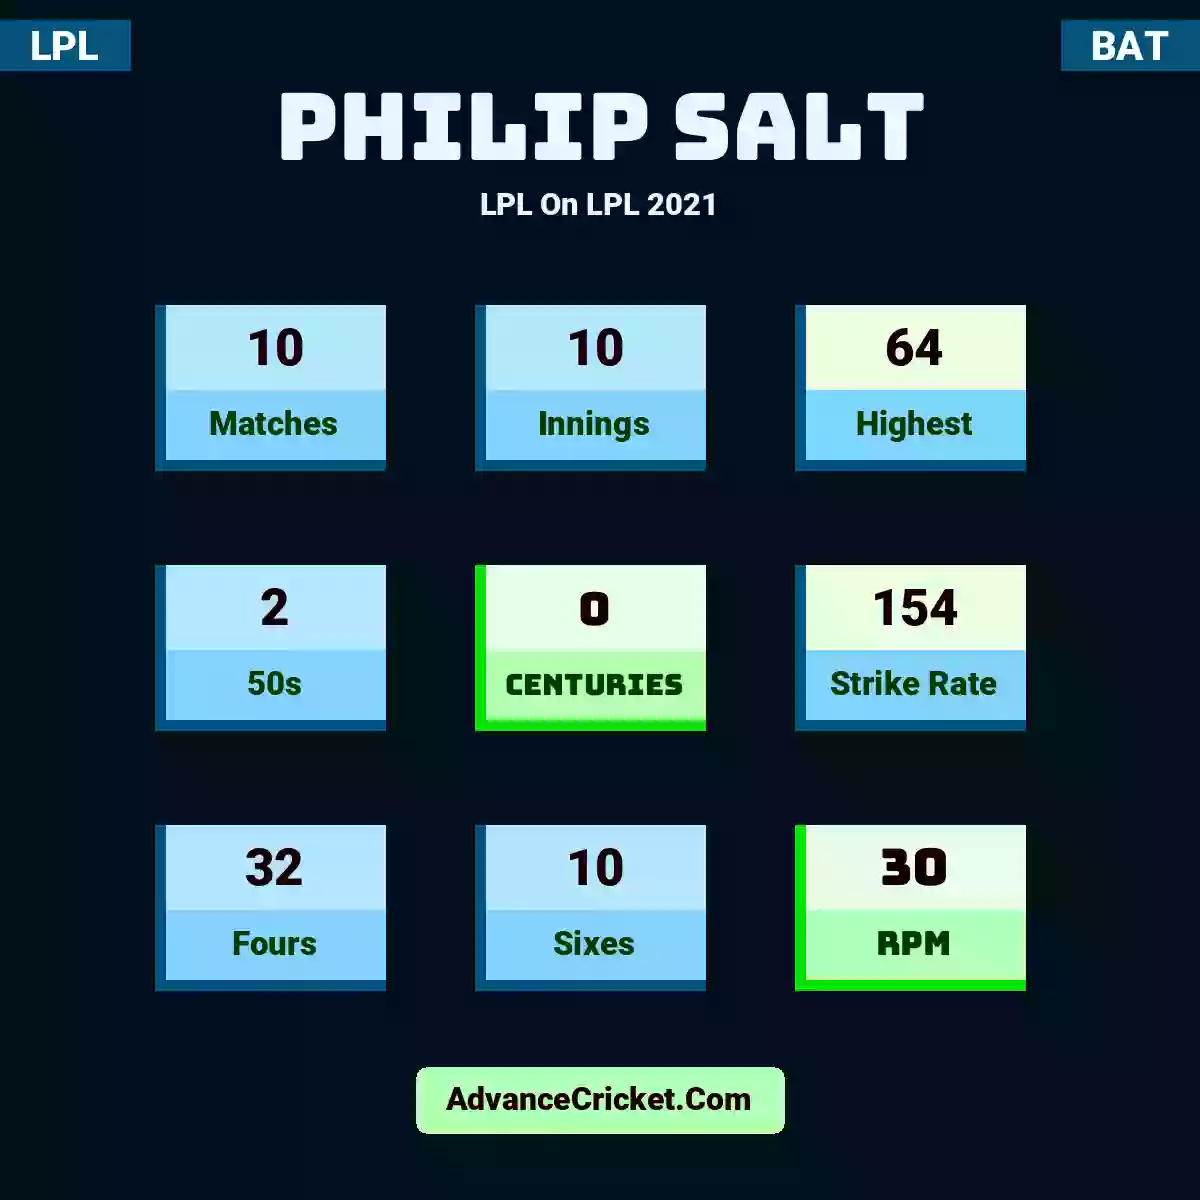 Philip Salt LPL  On LPL 2021, Philip Salt played 10 matches, scored 64 runs as highest, 2 half-centuries, and 0 centuries, with a strike rate of 154. P.Salt hit 32 fours and 10 sixes, with an RPM of 30.